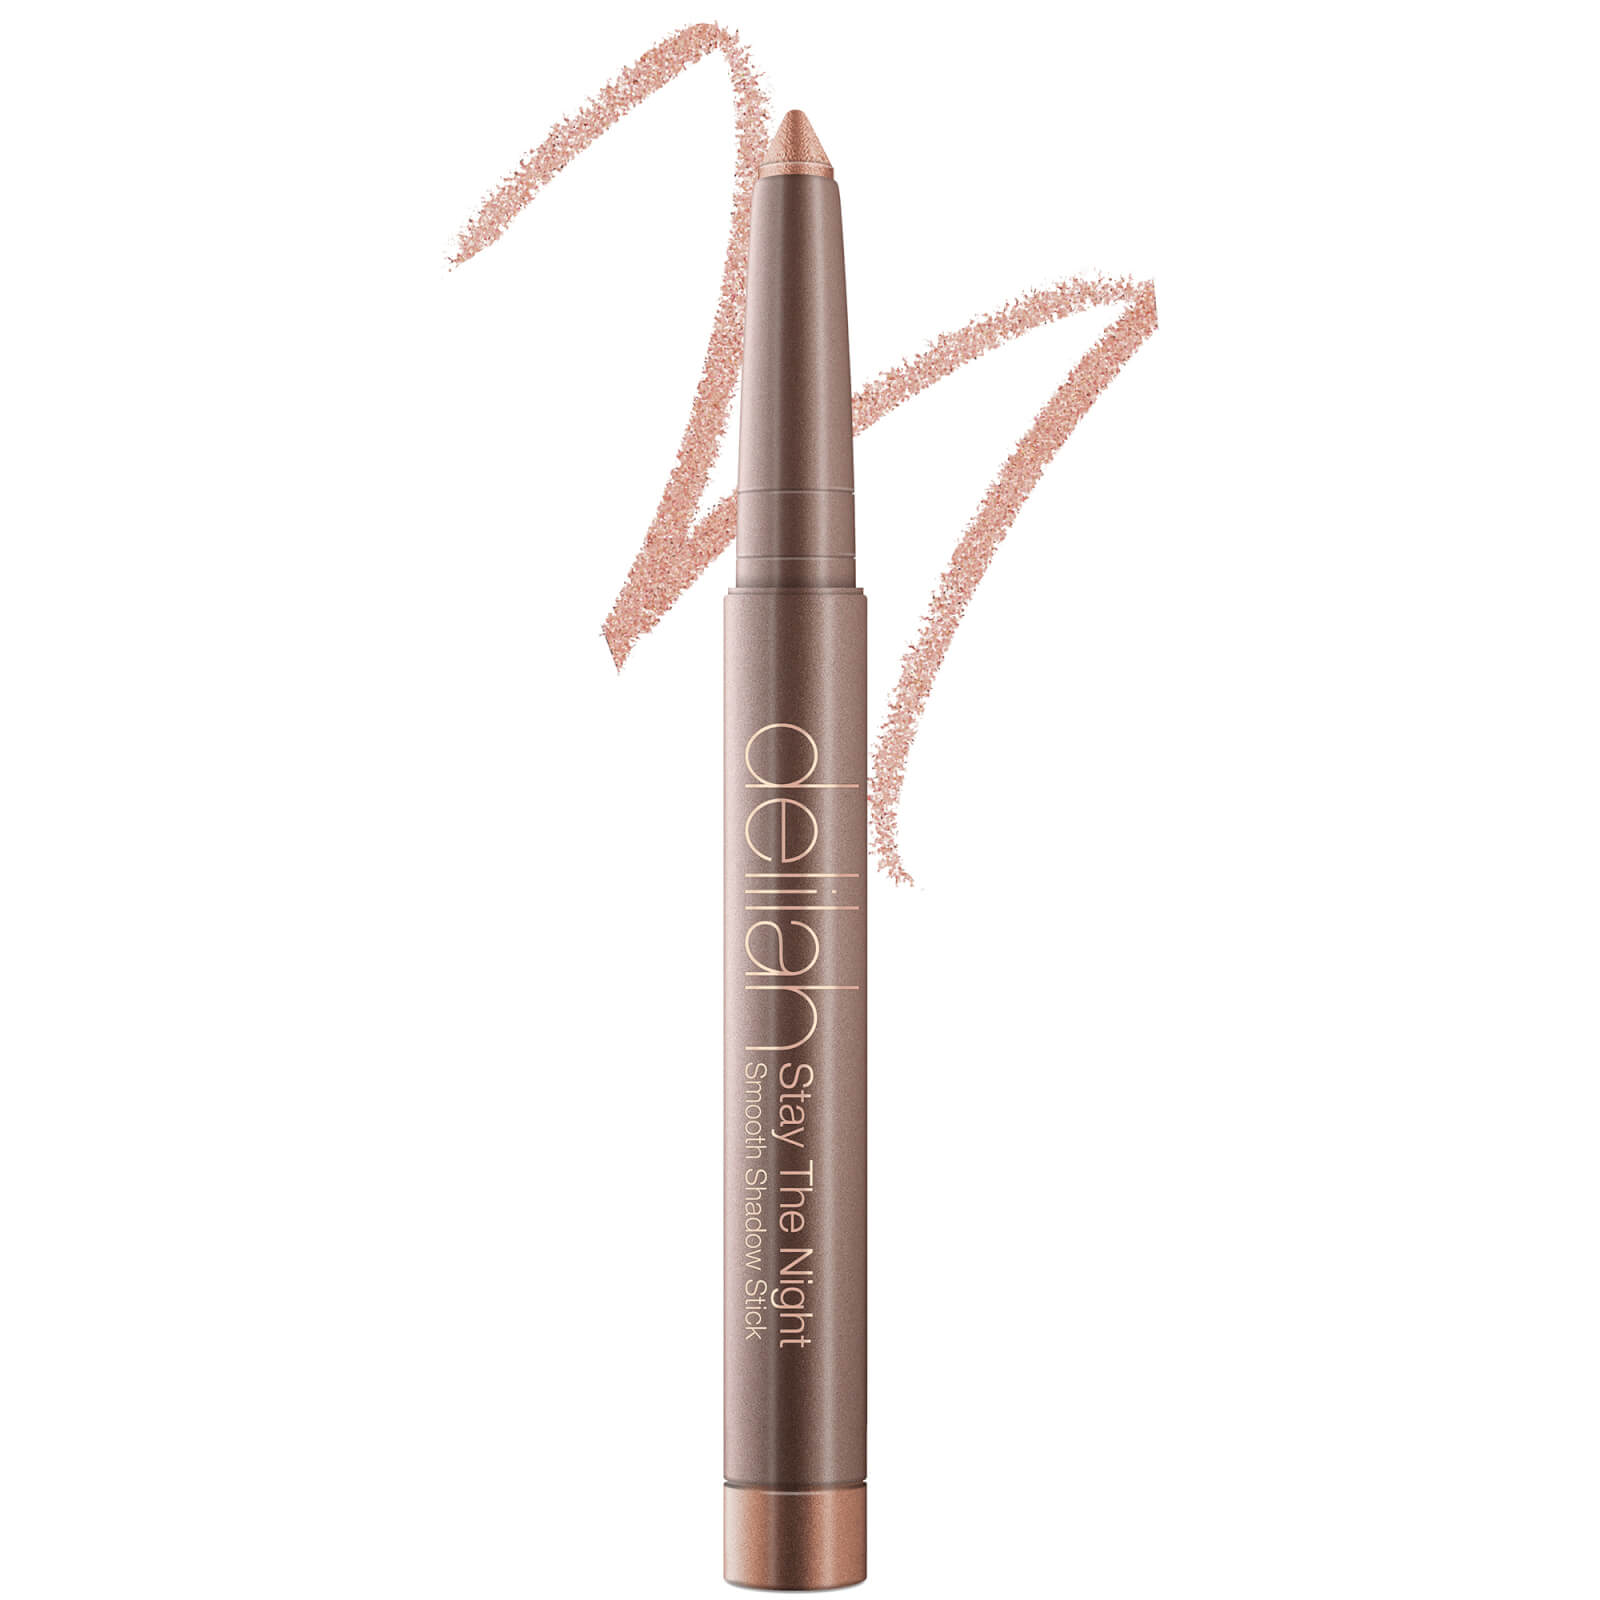 Delilah Stay The Night Smooth Shadow Stick 16g (Various Shades) - Pink Champagne